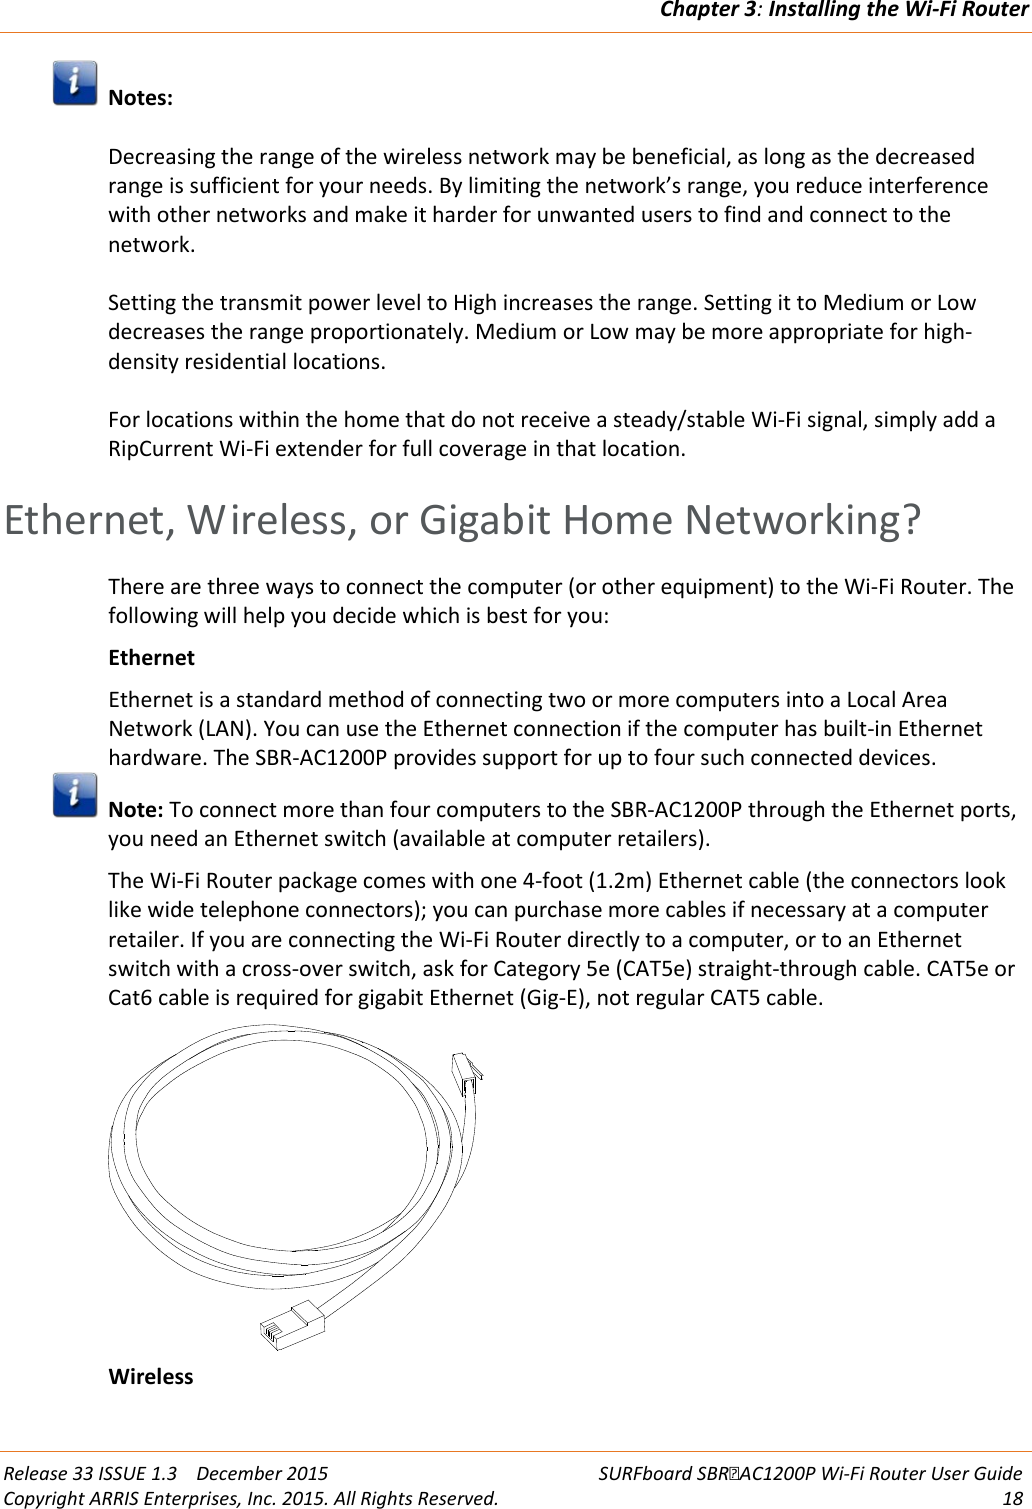 Chapter 3: Installing the Wi-Fi Router  Release 33 ISSUE 1.3    December 2015 SURFboard SBRAC1200P Wi-Fi Router User Guide Copyright ARRIS Enterprises, Inc. 2015. All Rights Reserved. 18   Notes:  Decreasing the range of the wireless network may be beneficial, as long as the decreased range is sufficient for your needs. By limiting the network’s range, you reduce interference with other networks and make it harder for unwanted users to find and connect to the network.  Setting the transmit power level to High increases the range. Setting it to Medium or Low decreases the range proportionately. Medium or Low may be more appropriate for high-density residential locations.  For locations within the home that do not receive a steady/stable Wi-Fi signal, simply add a RipCurrent Wi-Fi extender for full coverage in that location.   Ethernet, Wireless, or Gigabit Home Networking? There are three ways to connect the computer (or other equipment) to the Wi-Fi Router. The following will help you decide which is best for you: Ethernet Ethernet is a standard method of connecting two or more computers into a Local Area Network (LAN). You can use the Ethernet connection if the computer has built-in Ethernet hardware. The SBR-AC1200P provides support for up to four such connected devices.  Note: To connect more than four computers to the SBR-AC1200P through the Ethernet ports, you need an Ethernet switch (available at computer retailers). The Wi-Fi Router package comes with one 4-foot (1.2m) Ethernet cable (the connectors look like wide telephone connectors); you can purchase more cables if necessary at a computer retailer. If you are connecting the Wi-Fi Router directly to a computer, or to an Ethernet switch with a cross-over switch, ask for Category 5e (CAT5e) straight-through cable. CAT5e or Cat6 cable is required for gigabit Ethernet (Gig-E), not regular CAT5 cable.  Wireless 